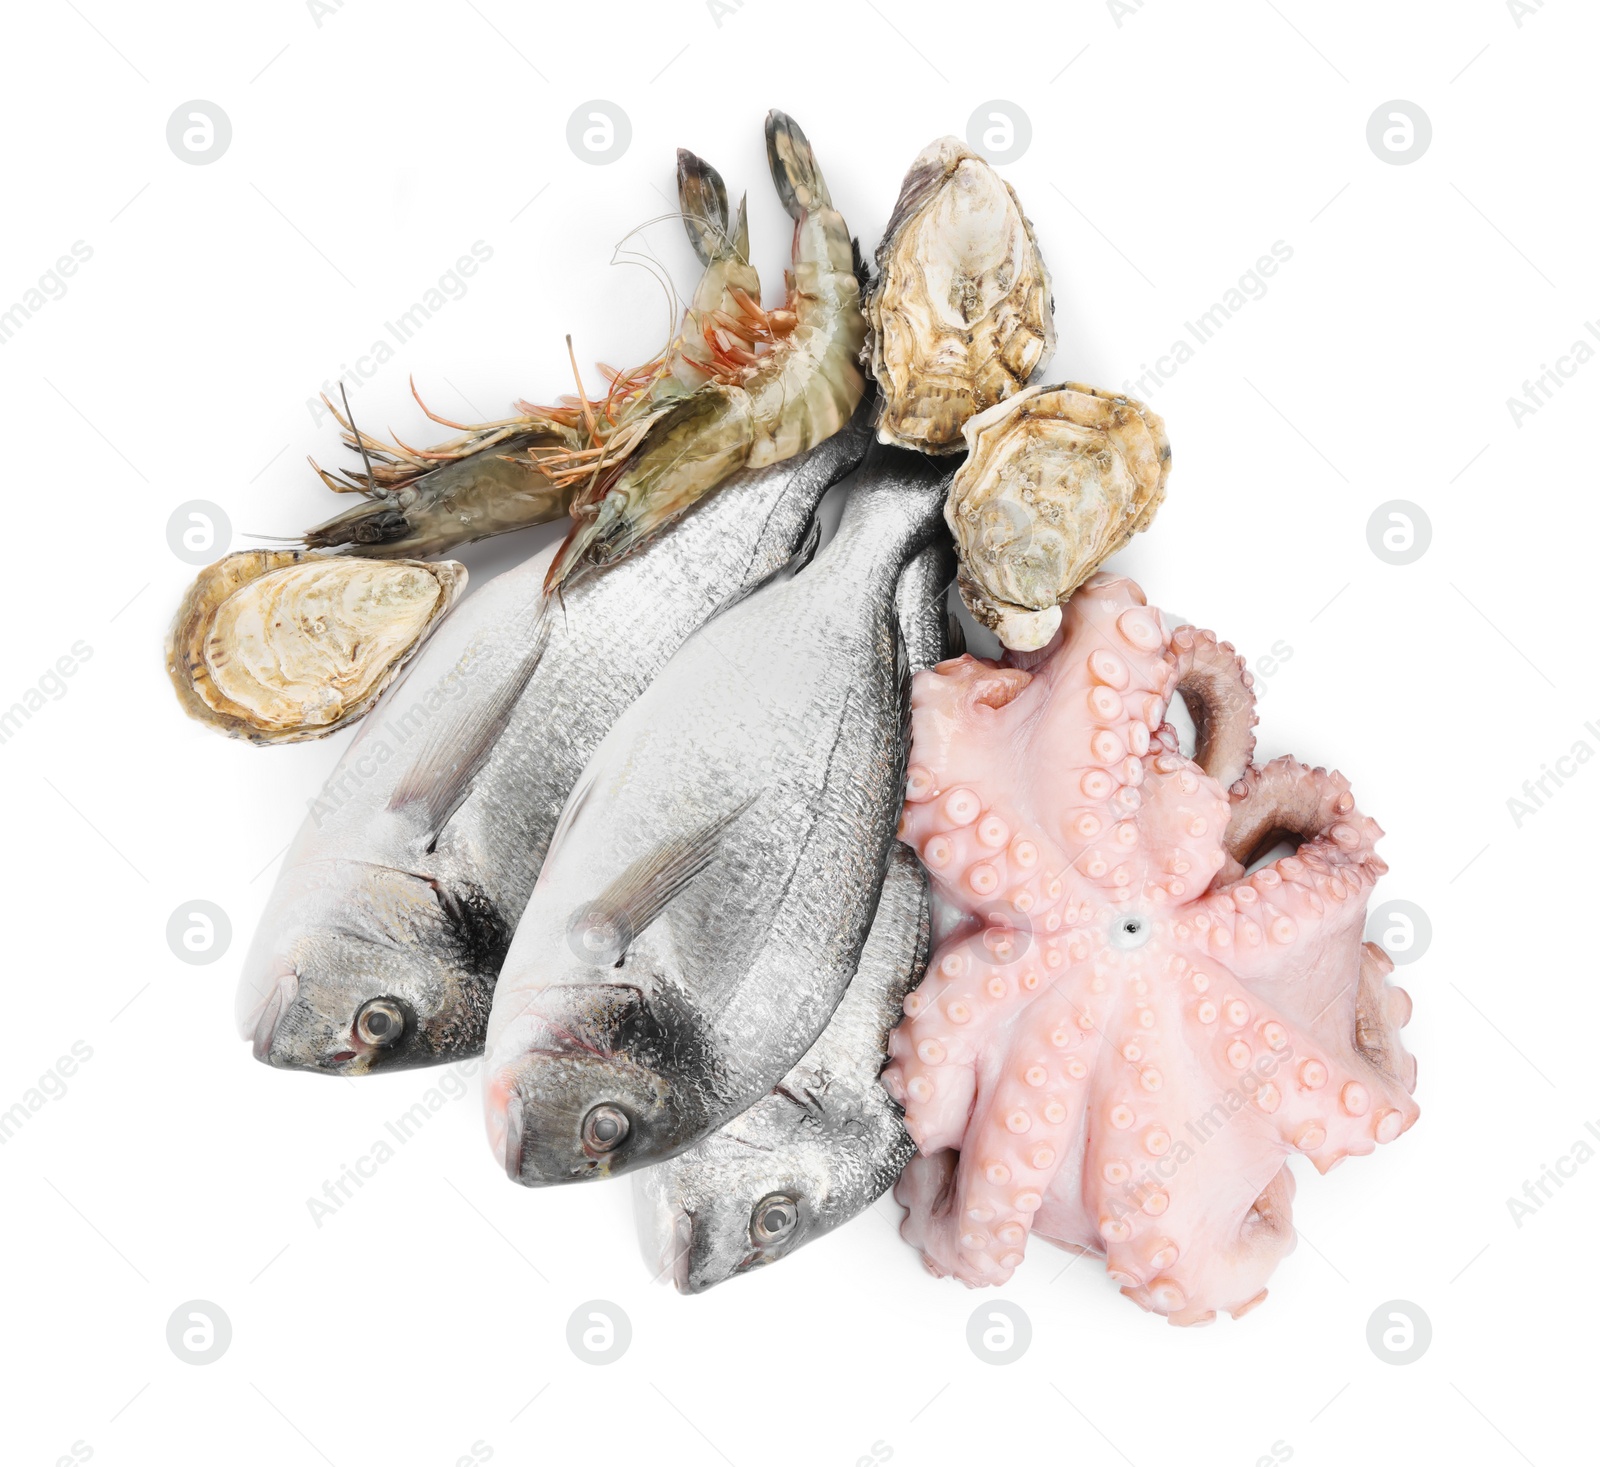 Photo of Fresh dorado fish, octopus, oysters and shrimps on white background, top view